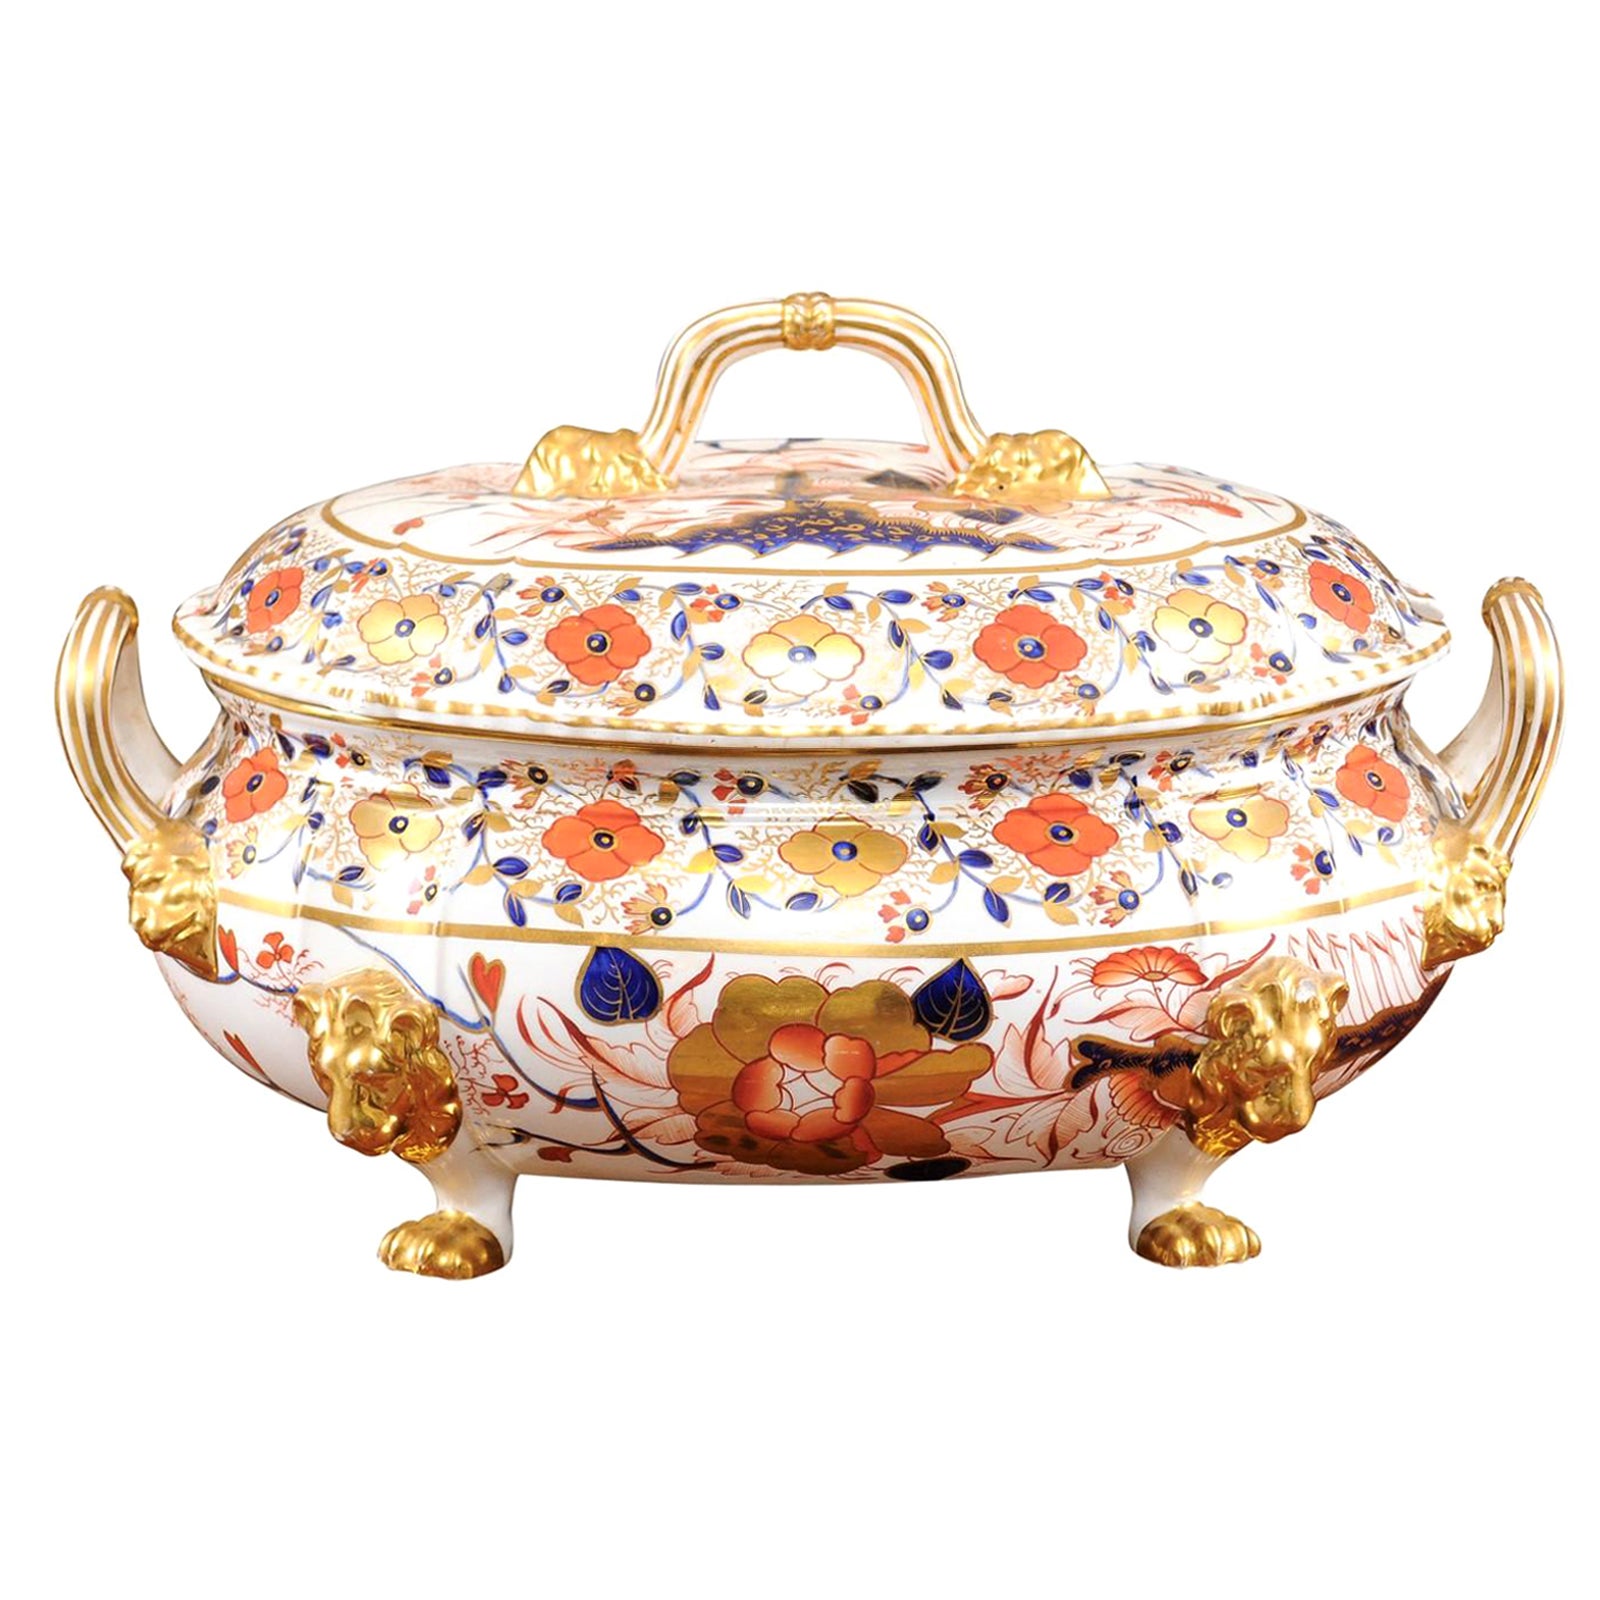 19th Century English Derby Porcelain Tureen with Lid